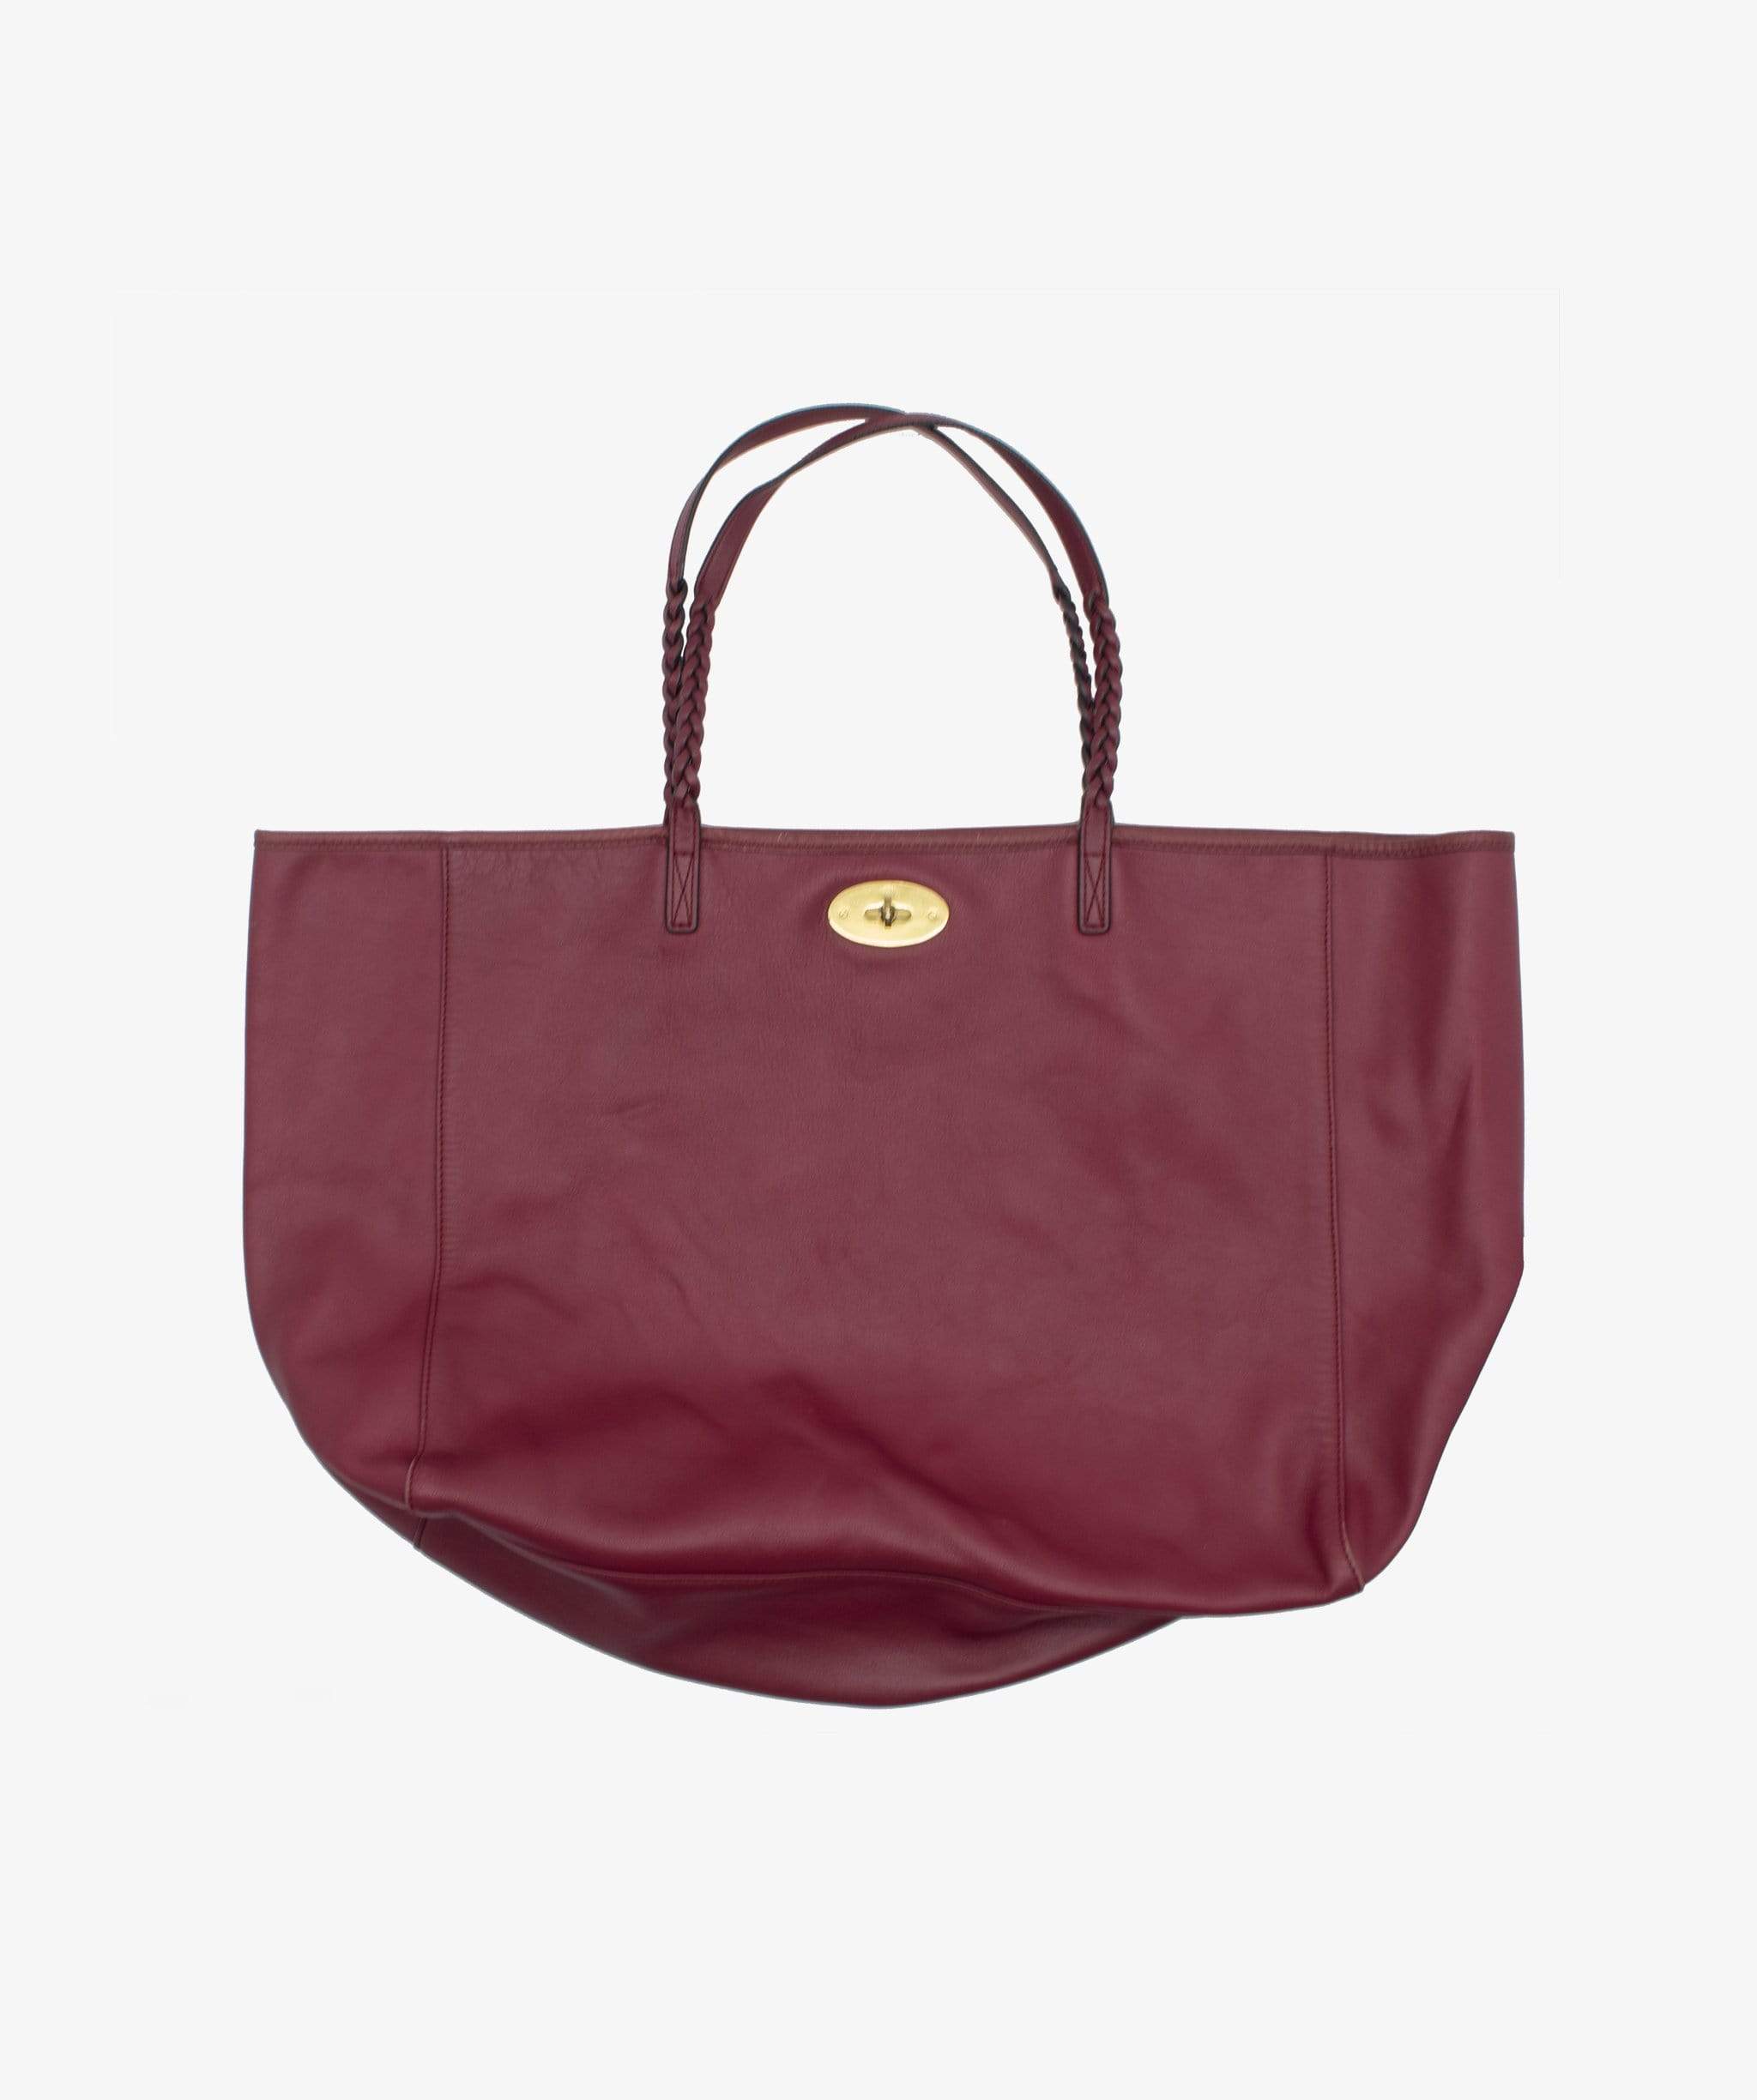 Mulberry Mulberry Shopper bag